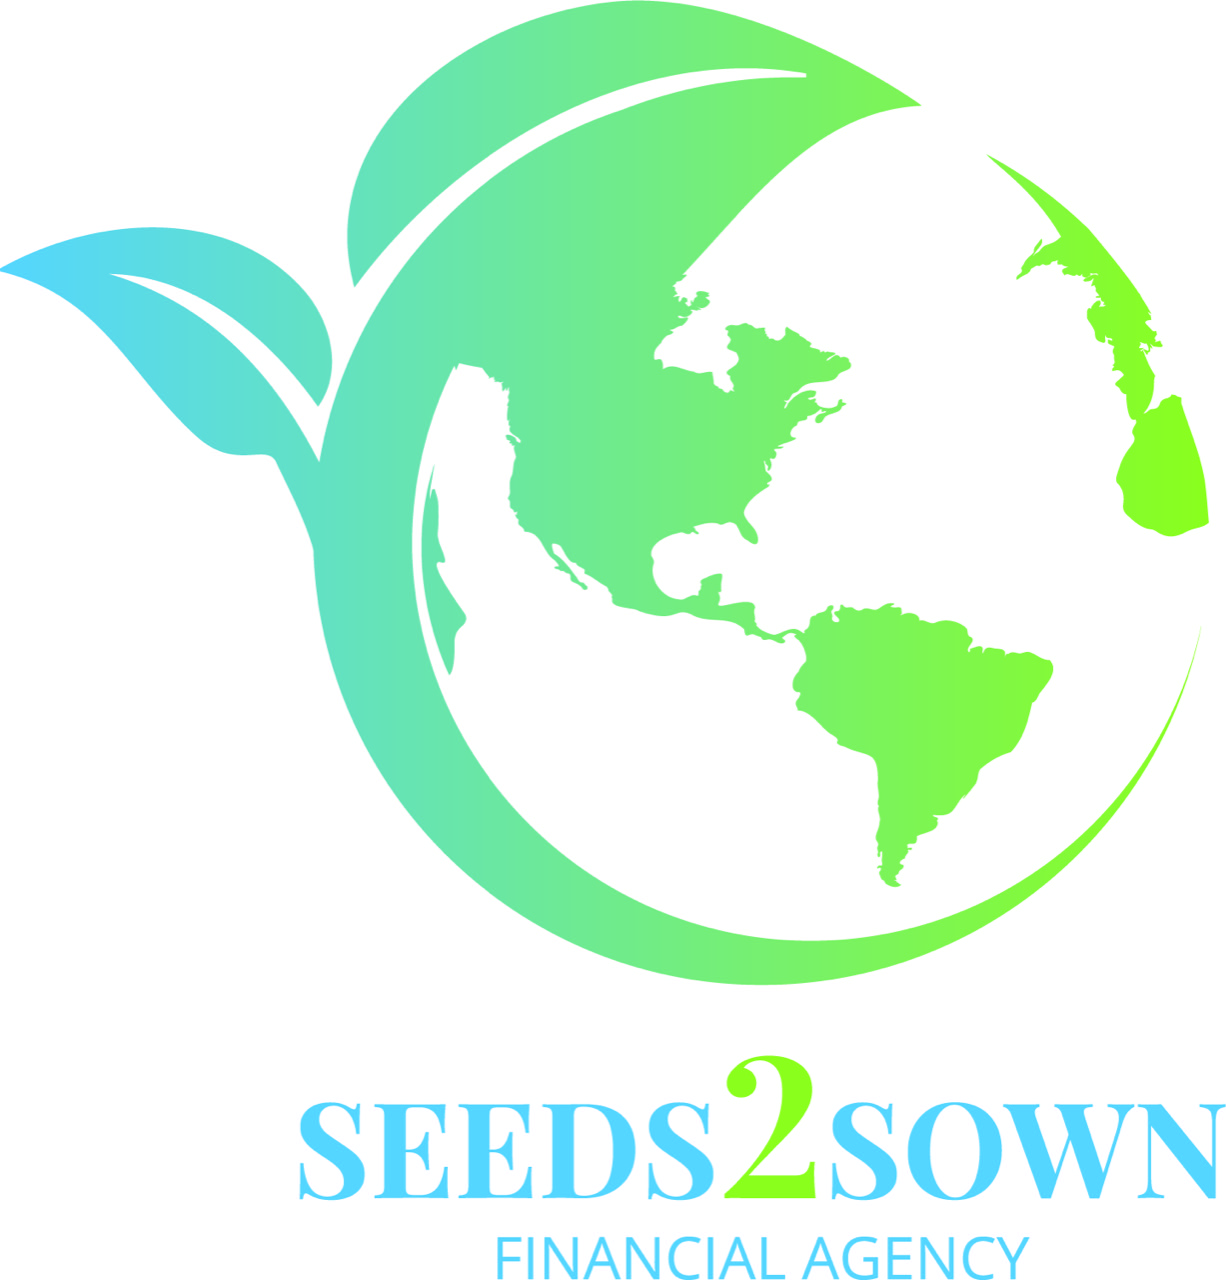 SEEDS AND SOWN LOGO